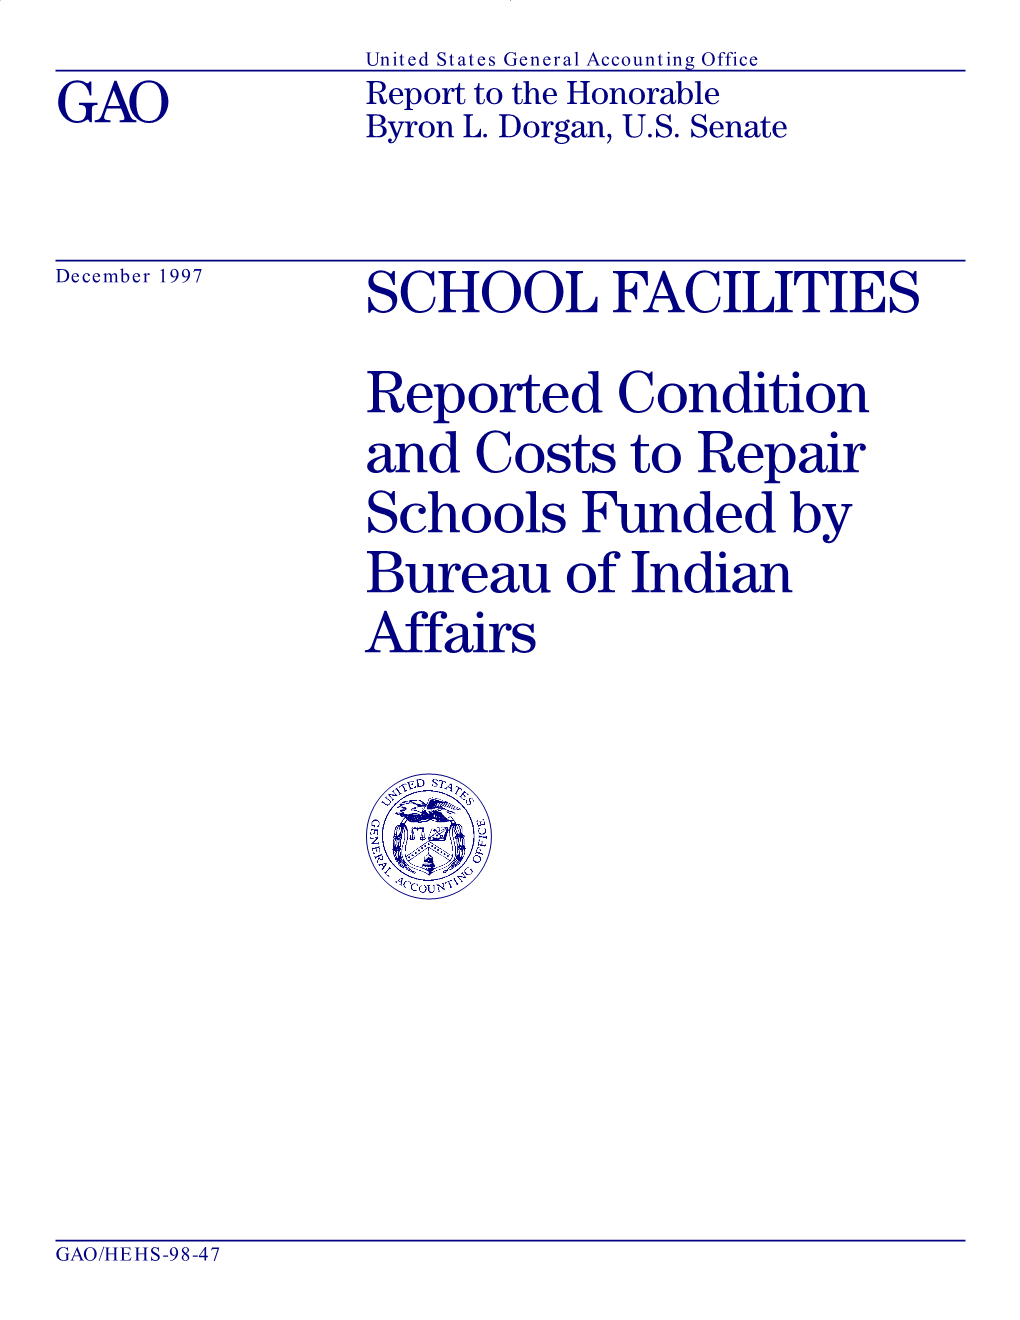 SCHOOL FACILITIES: Reported Condition and Costs to Repair